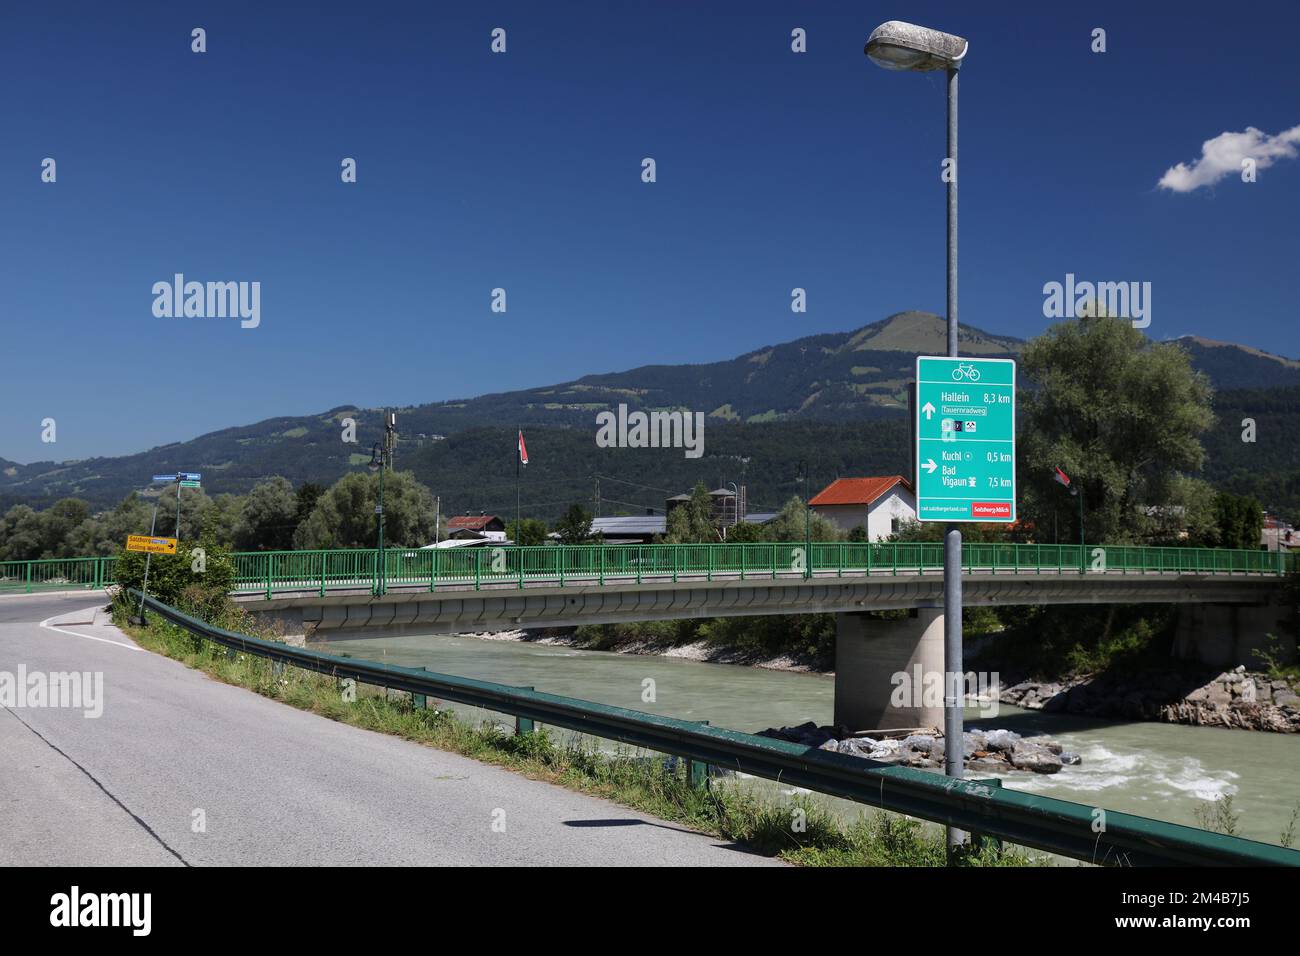 HALLEIN, AUSTRIA - AUGUST 4, 2022: Bicycle route direction signs in Hallein, including major long distance cycling route Tauernradweg in Austria. Stock Photo